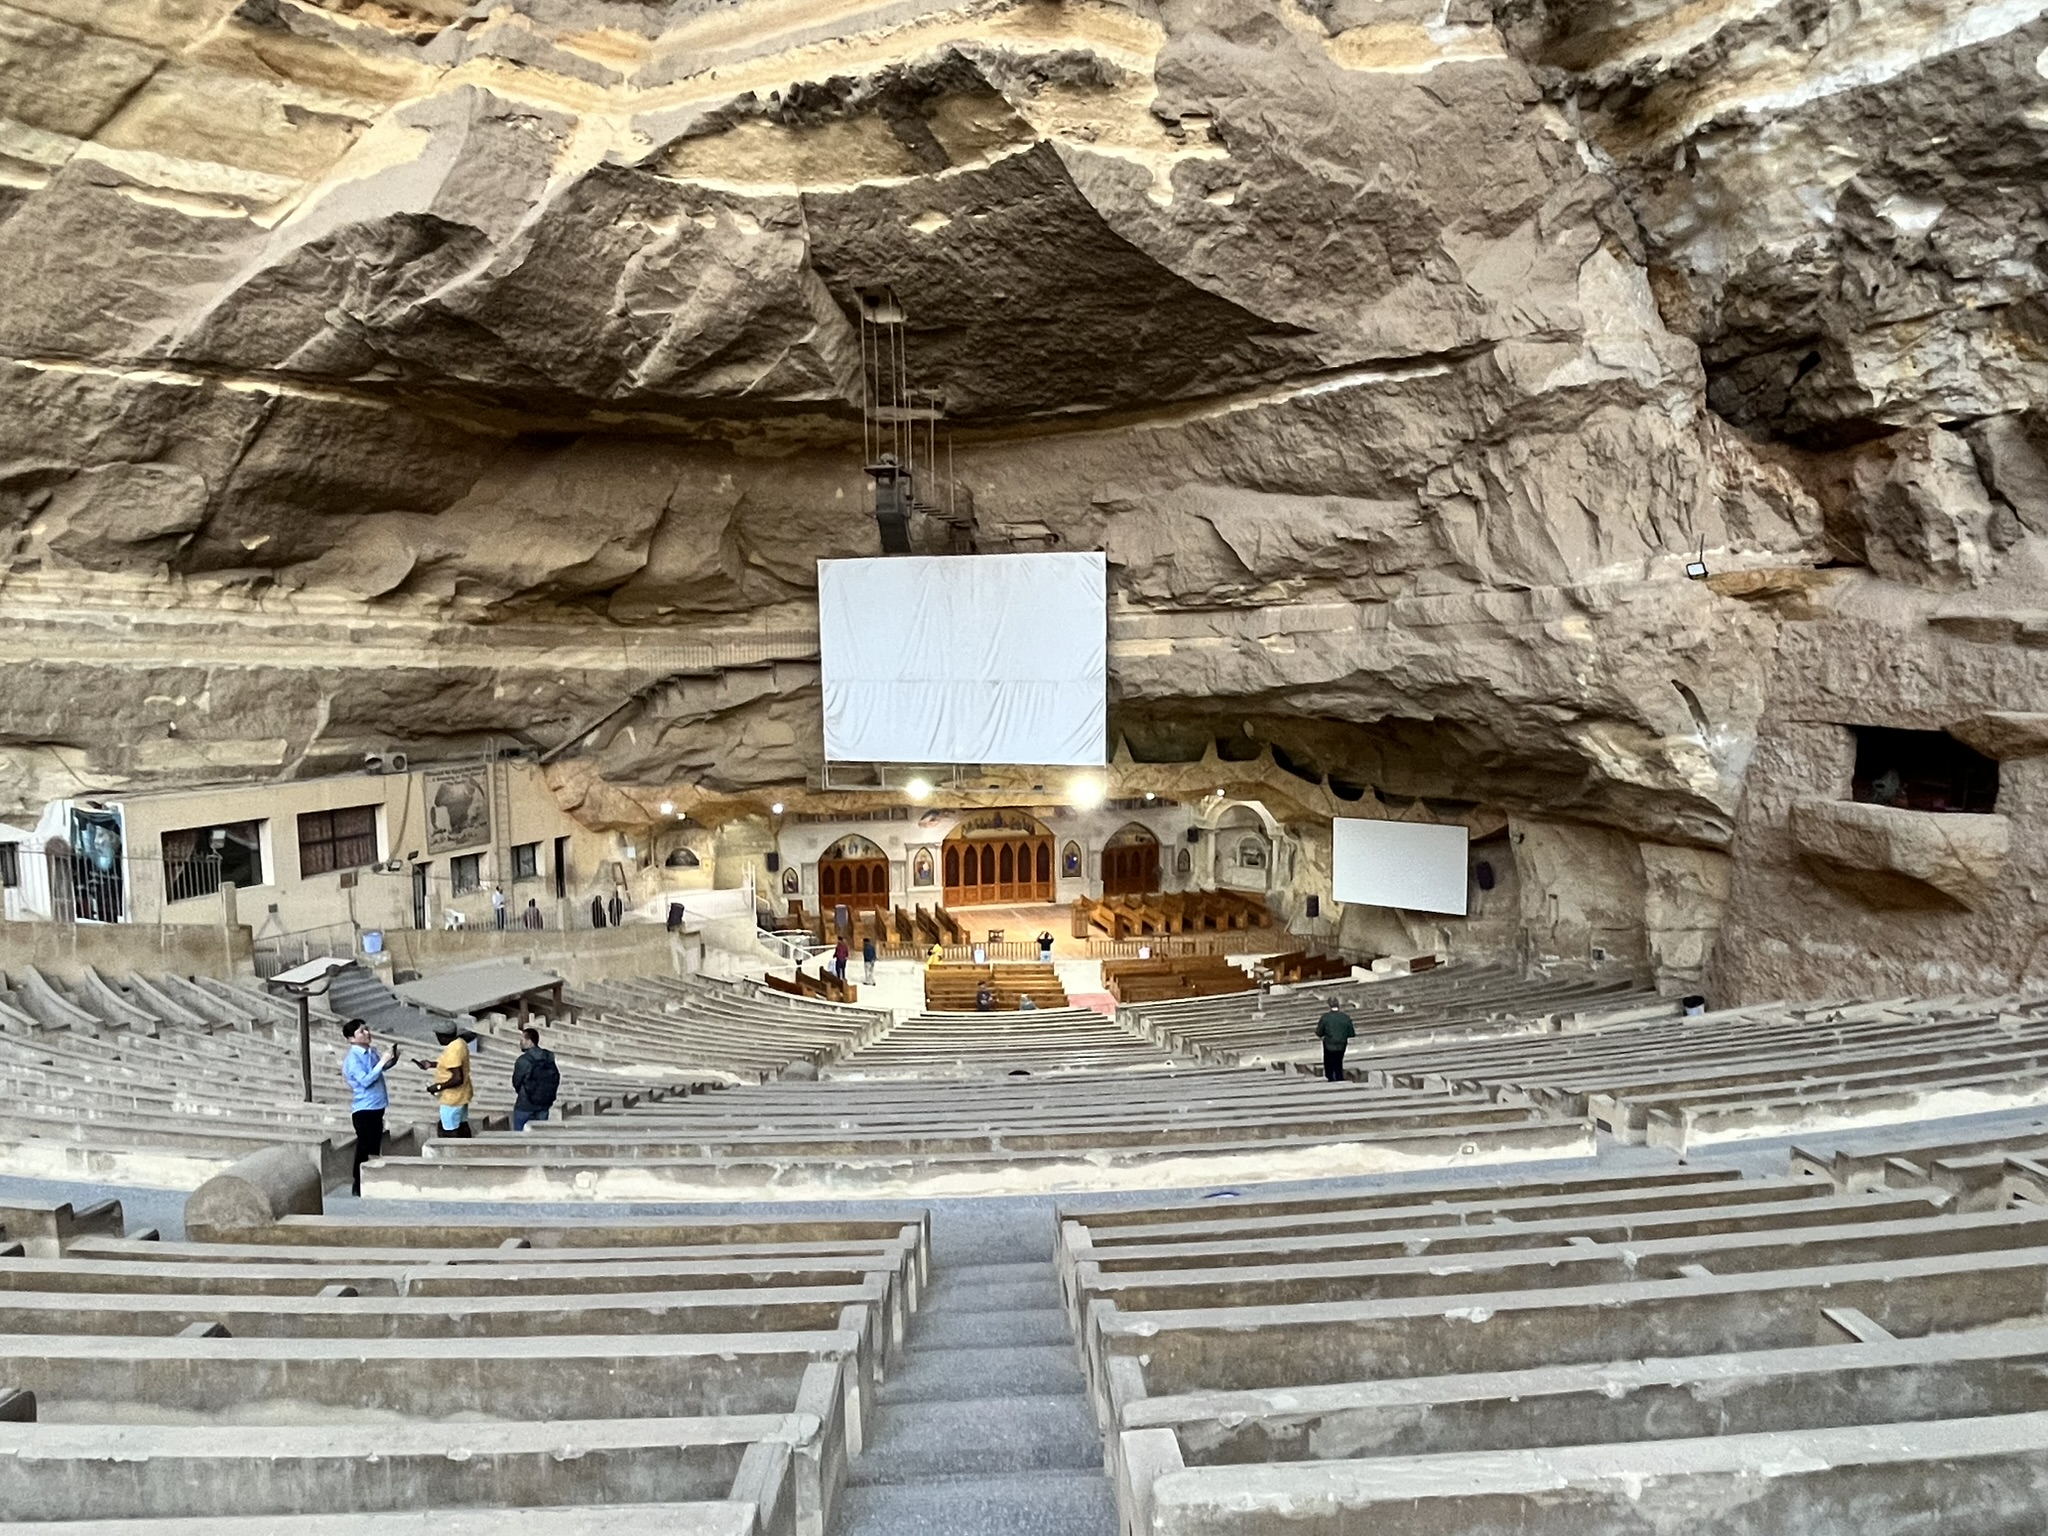 A screen dominates the centre of a church in a cave with amphitheatre seating.